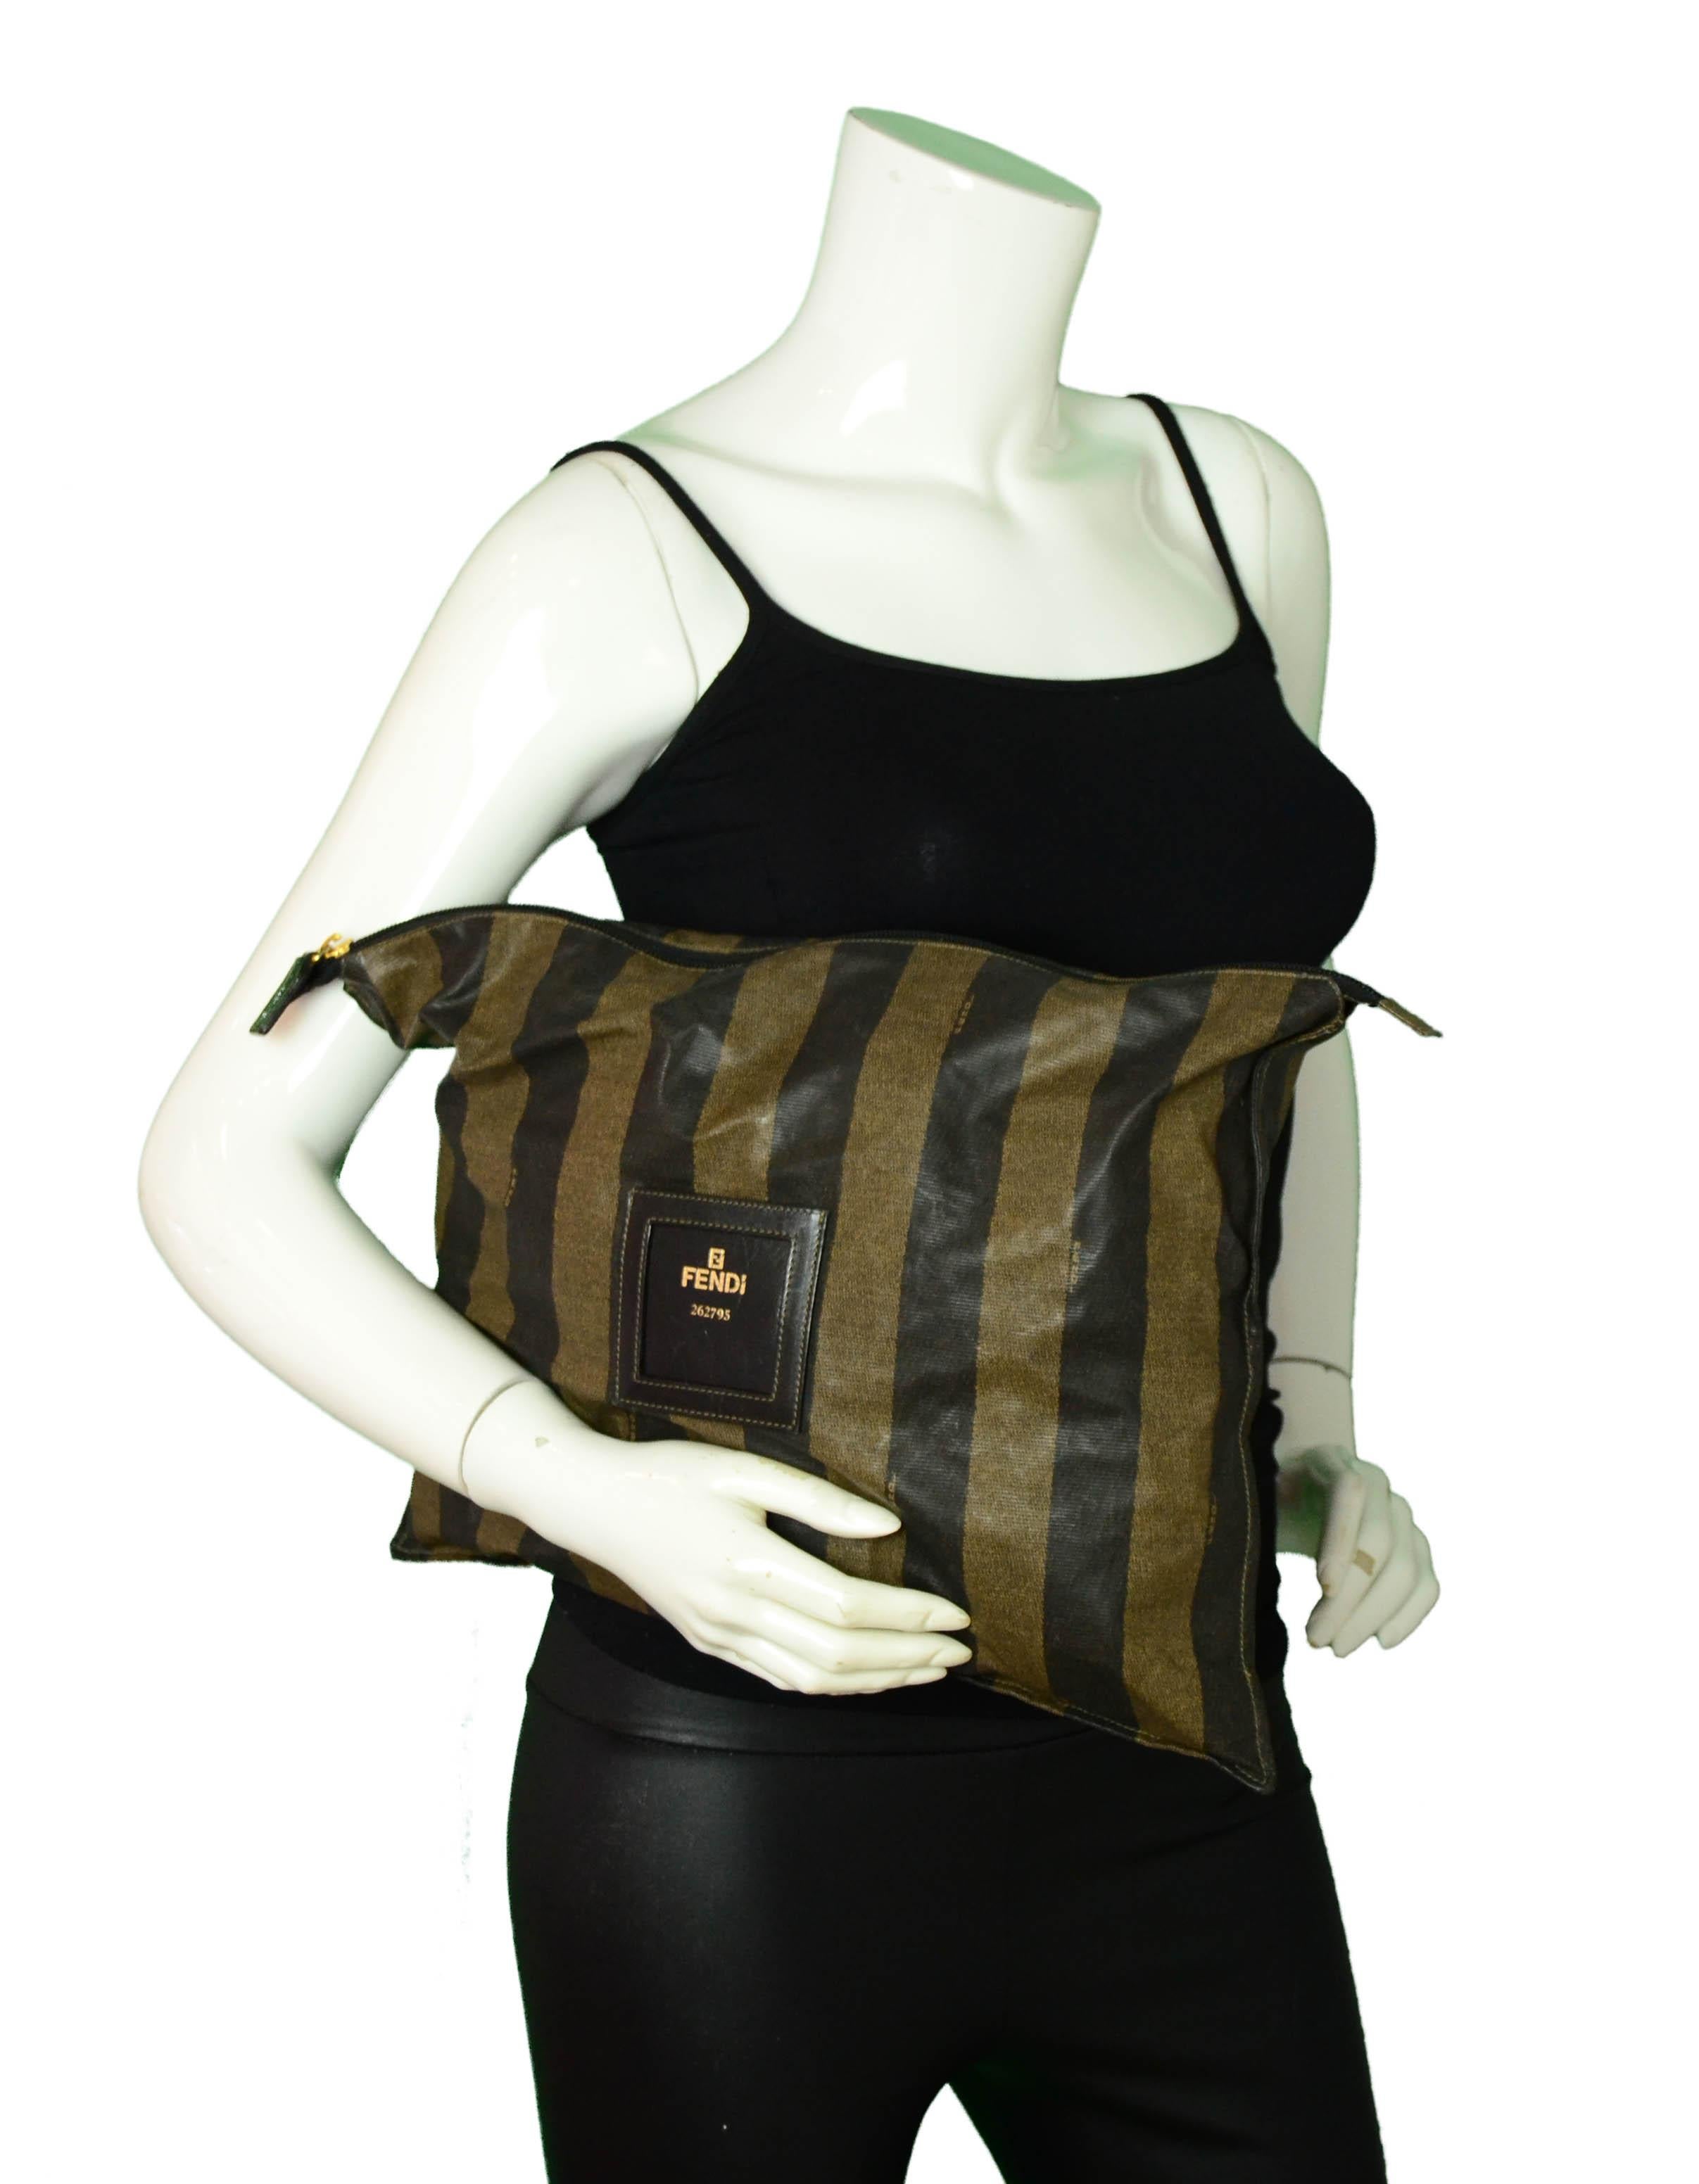 Fendi Vintage Brown Pequin Striped XL Zip Top Pouch Clutch

Made In: Italy
Color: Brown
Hardware: Goldtone
Materials: Coated Nylon/Leather
Lining: Nylon
Closure/Opening: Zip top
Exterior Condition: Very good - 2 small spots at back
Interior